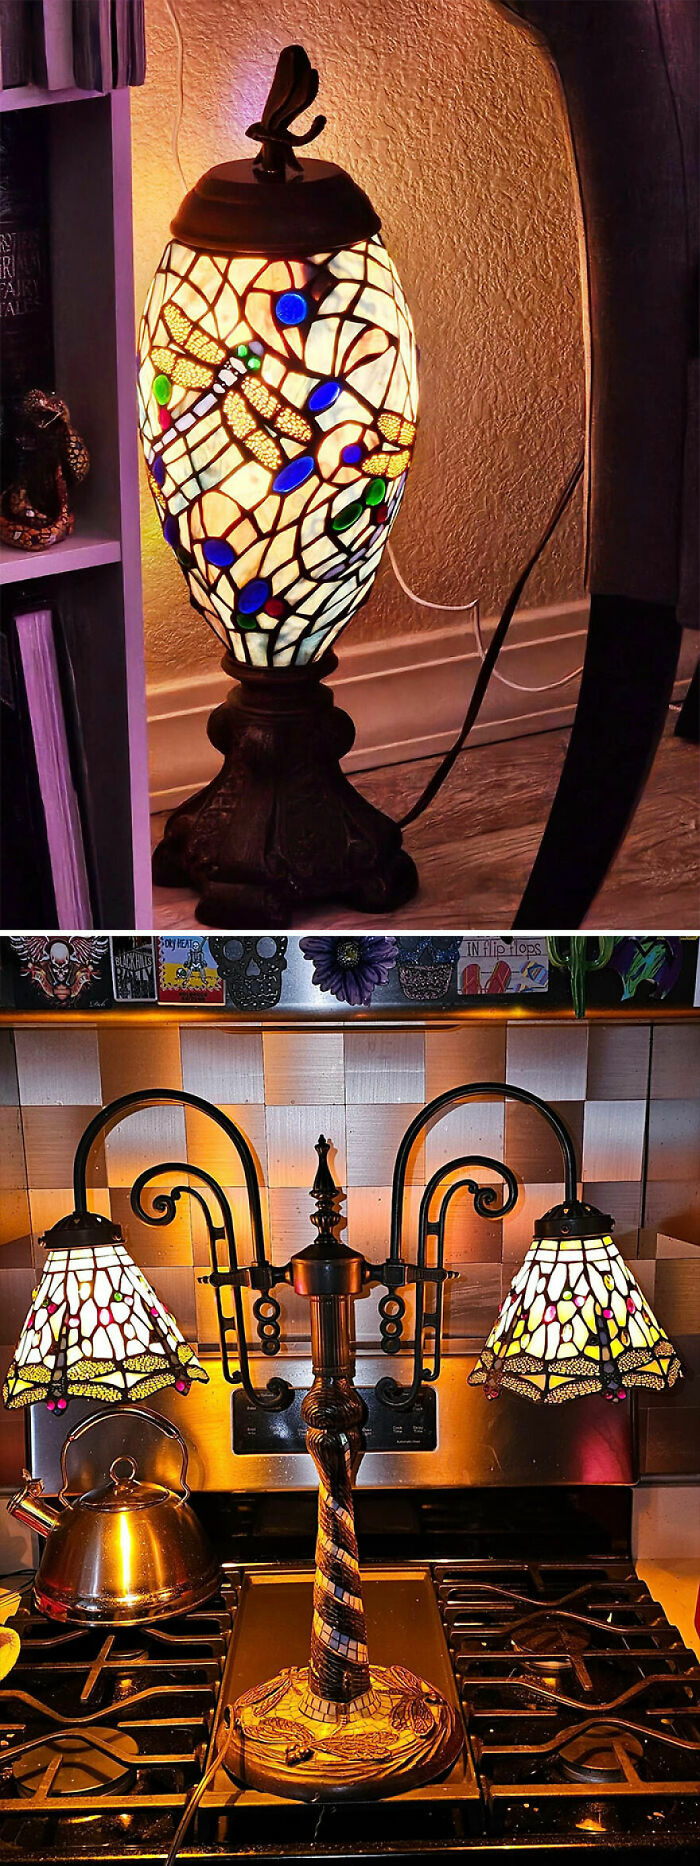 I'm Pretty Excited The Lamp On The Left Was On The Marketplace In Bullhead City, Az For $25 And I Said I Want It I'll Come Get It